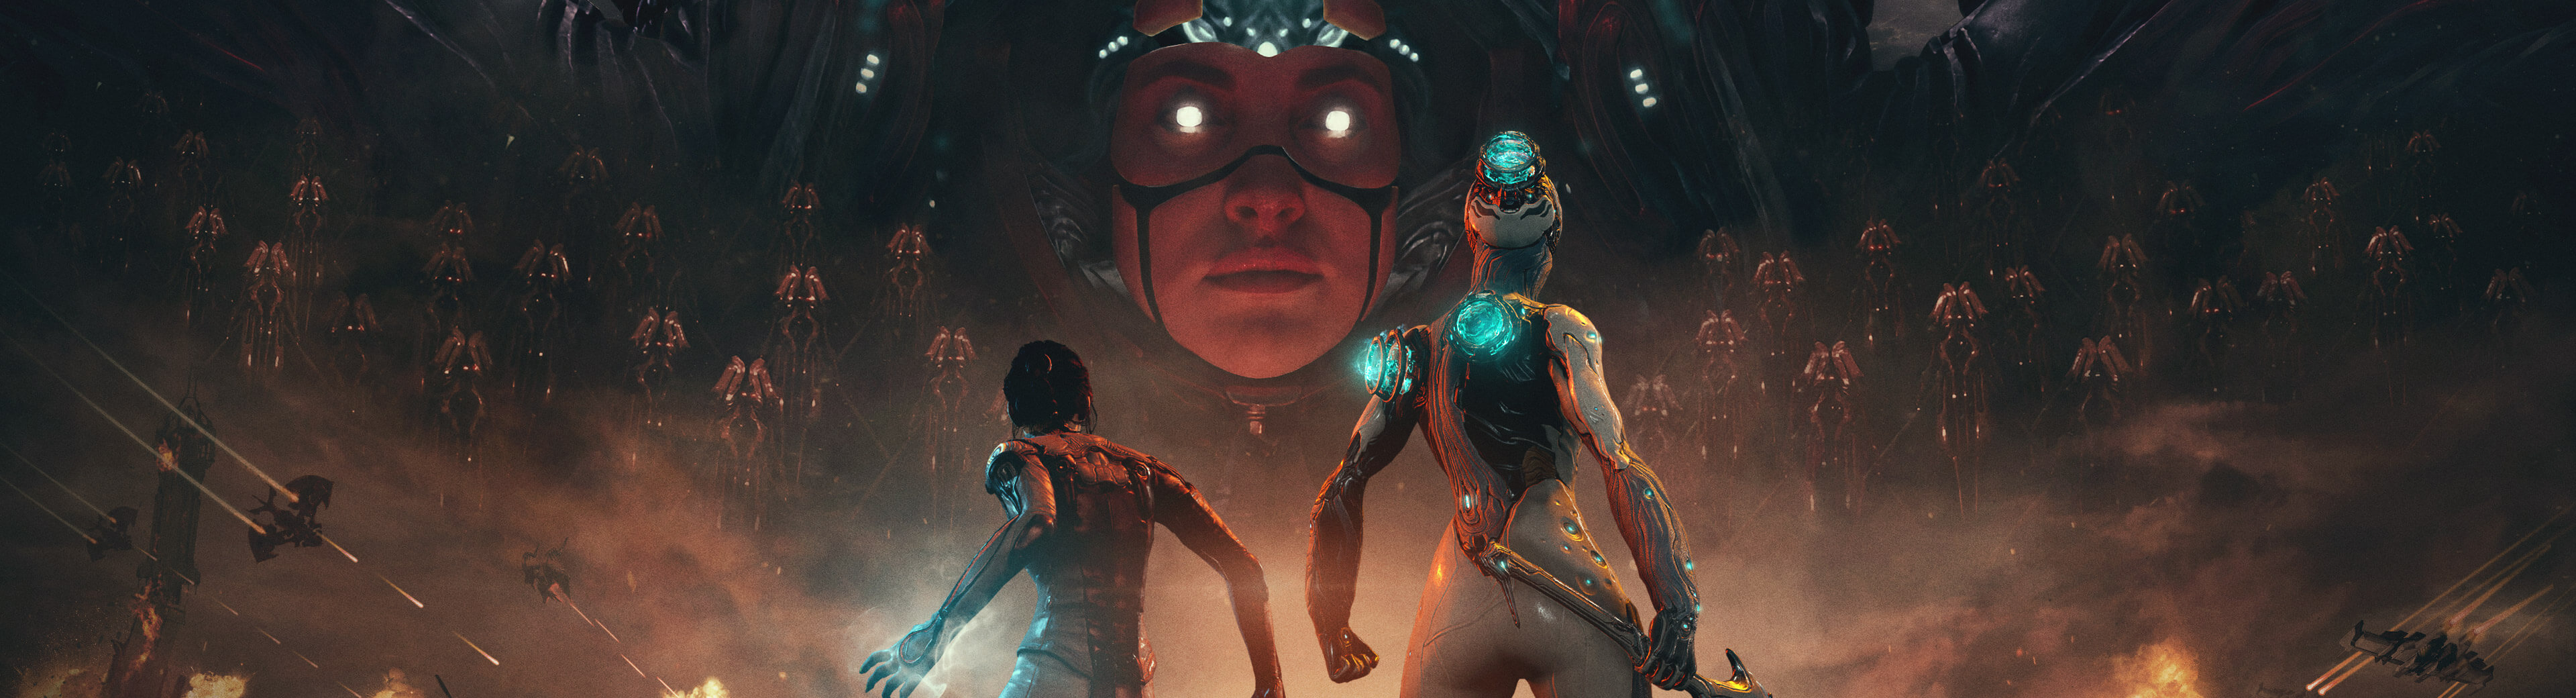 NEW CHAPTER FOR WARFRAME WITH THE ARRIVAL OF ‘THE NEW WAR’